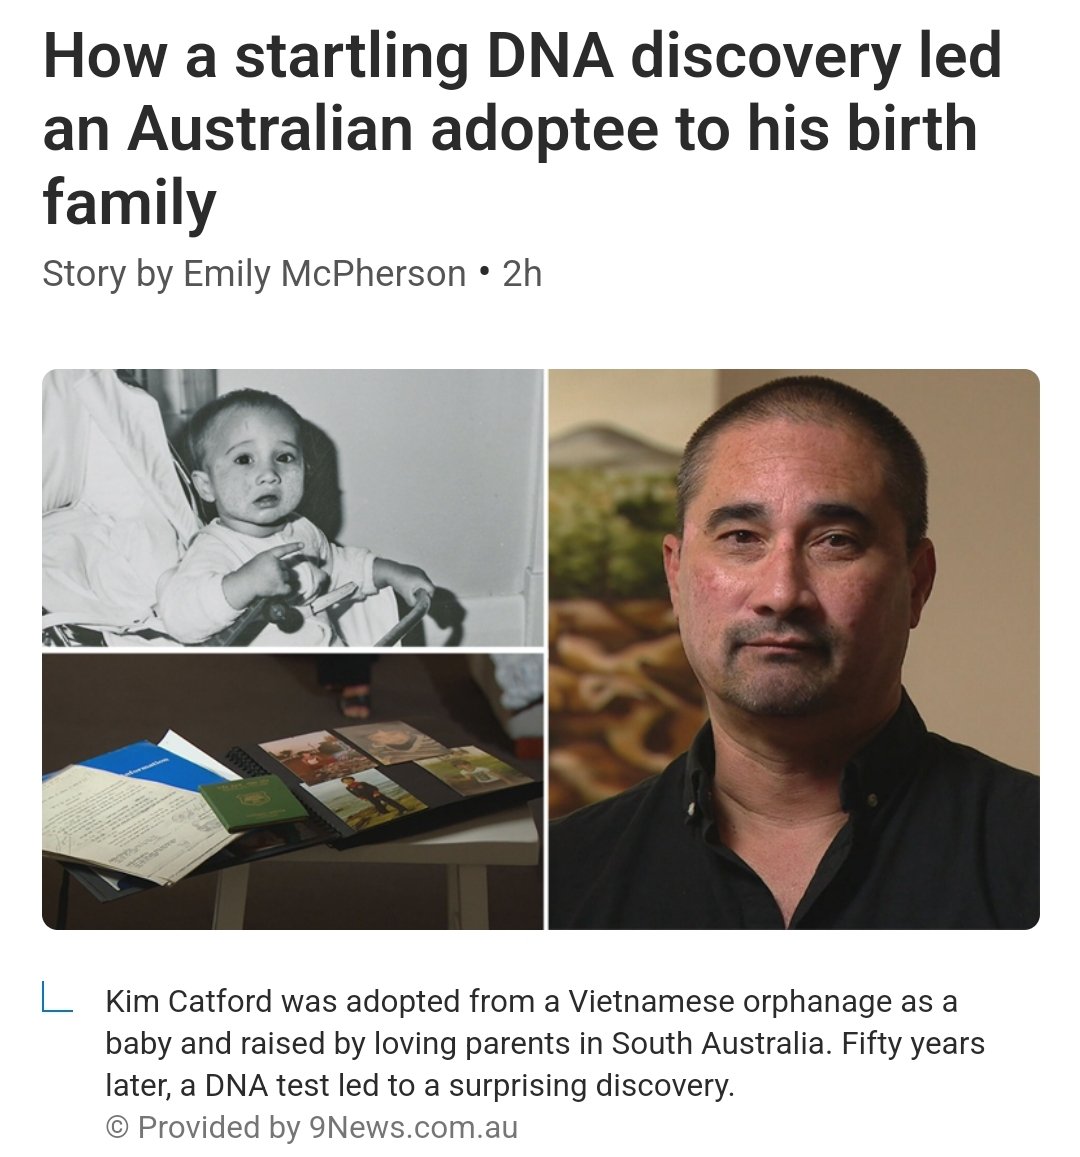 Kim grew up thinking his birth parents were most likely both dead, because that was what his Australian mother and father had told him. #adoption #adopteevoices #adopteerights #dnadiscovery #dnatest #dnatesting #dnasurprise 

msn.com/en-au/news/aus…